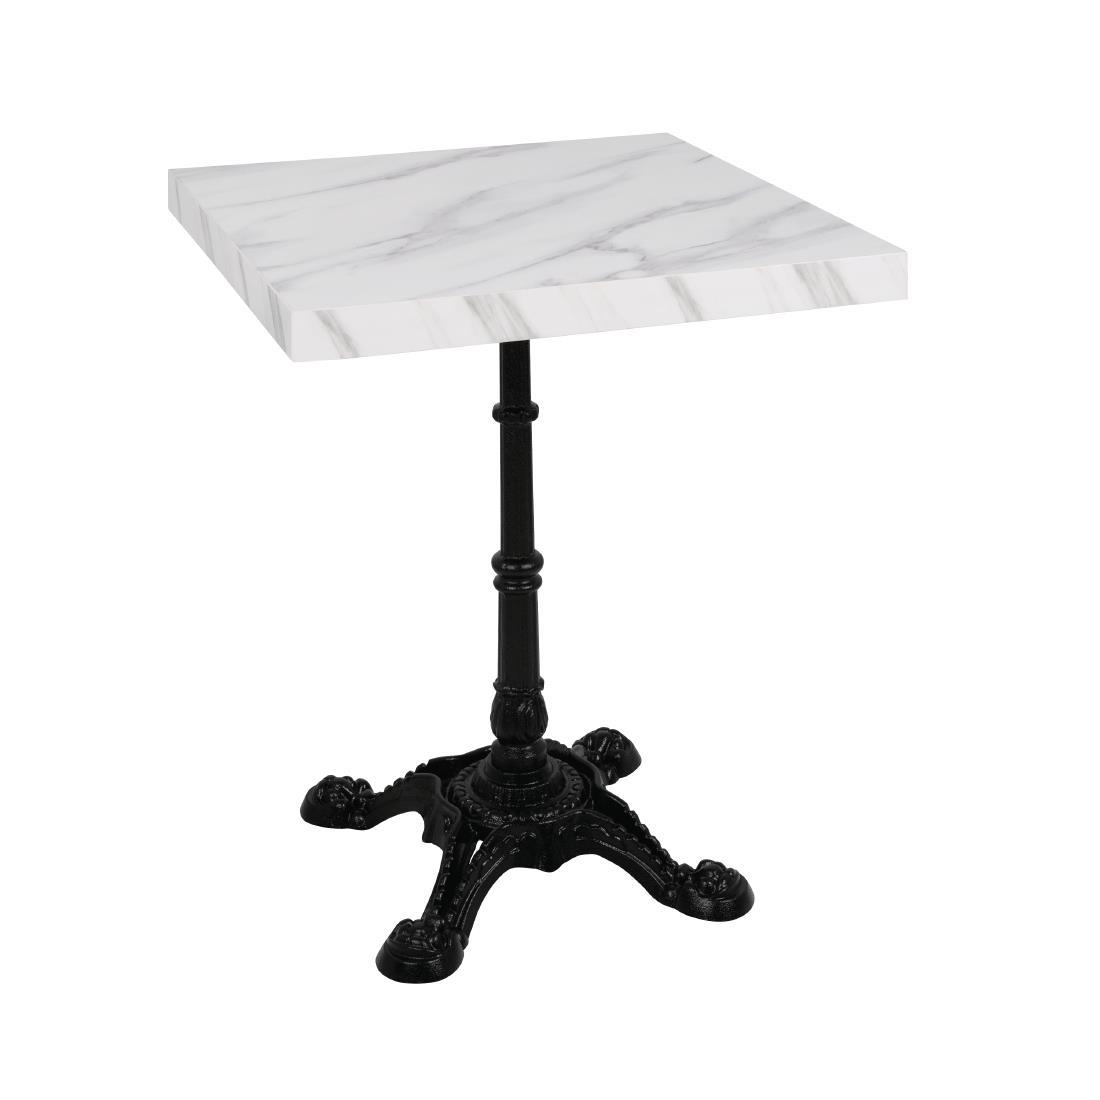 Bolero Pre-Drilled Square Table Top Marble Effect 600mm - DT444  - 3